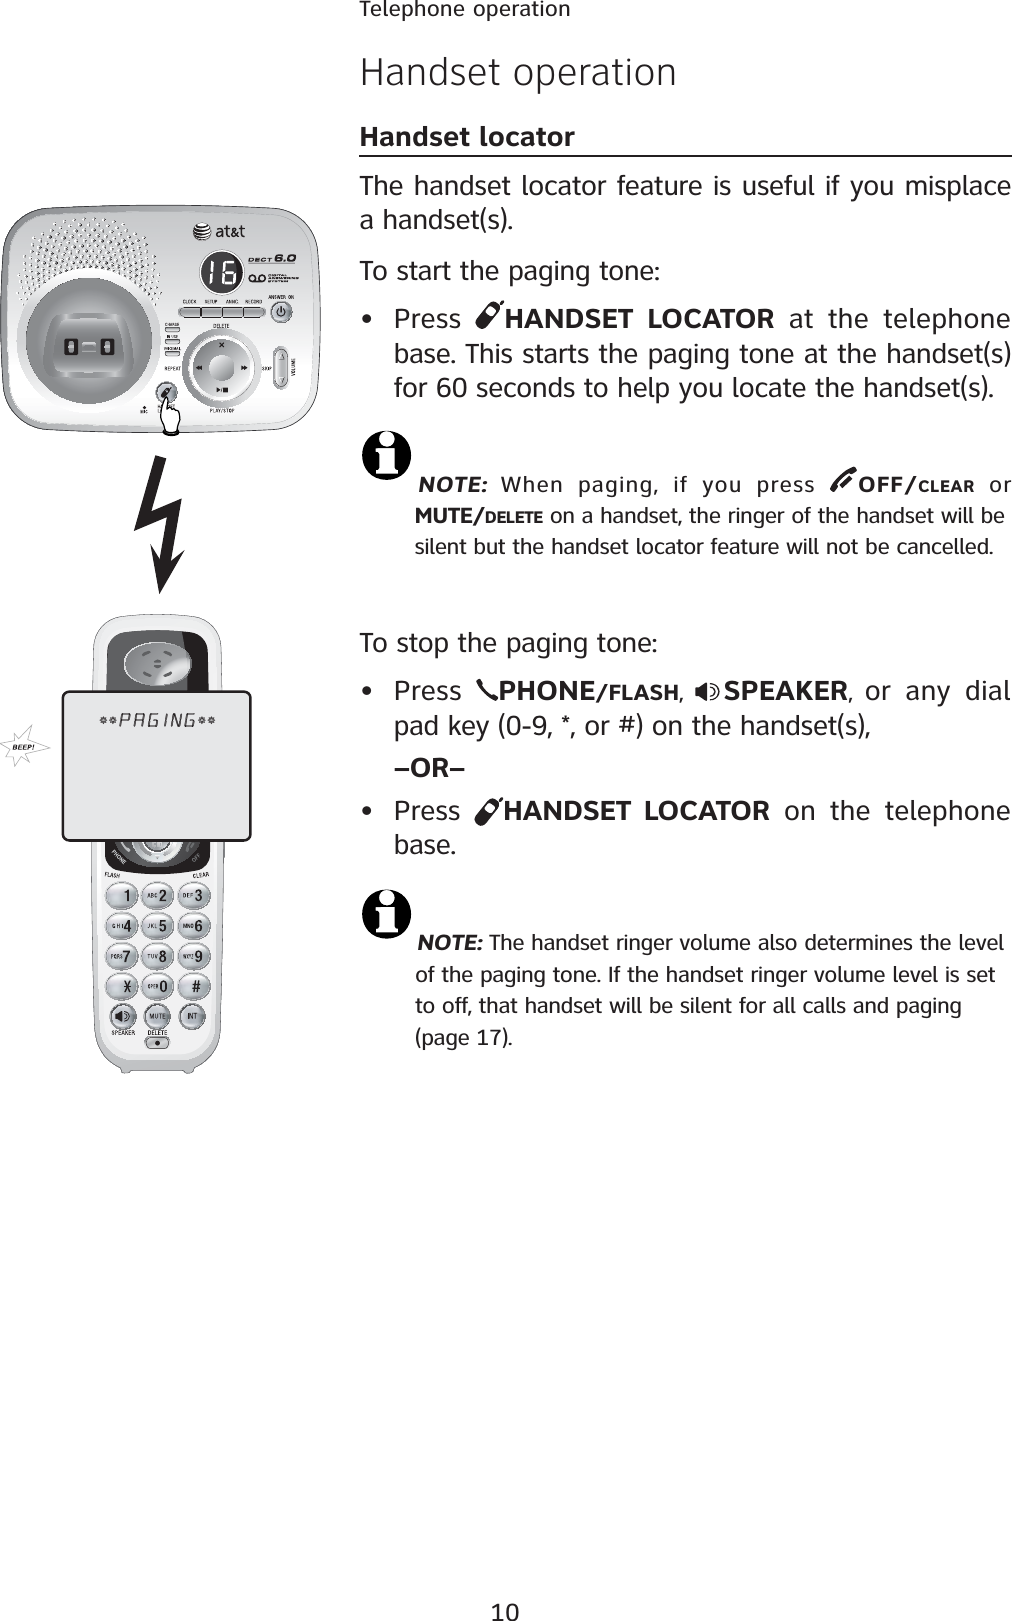 10Telephone operationHandset operationHandset locatorThe handset locator feature is useful if you misplace a handset(s). To start the paging tone: • Press  HANDSET LOCATOR at the telephone base. This starts the paging tone at the handset(s) for 60 seconds to help you locate the handset(s). NOTE:  When paging, if you press  OFF/CLEAR or    MUTE/DELETE on a handset, the ringer of the handset will be    silent but the handset locator feature will not be cancelled.To stop the paging tone:•Press  PHONE/FLASH,SPEAKER,or any dial pad key (0-9, *, or #) on the handset(s), –OR–• Press  HANDSET LOCATOR on the telephone base.NOTE: The handset ringer volume also determines the level         of the paging tone. If the handset ringer volume level is set         to off, that handset will be silent for all calls and paging                  (page 17).0!&apos;).&apos;